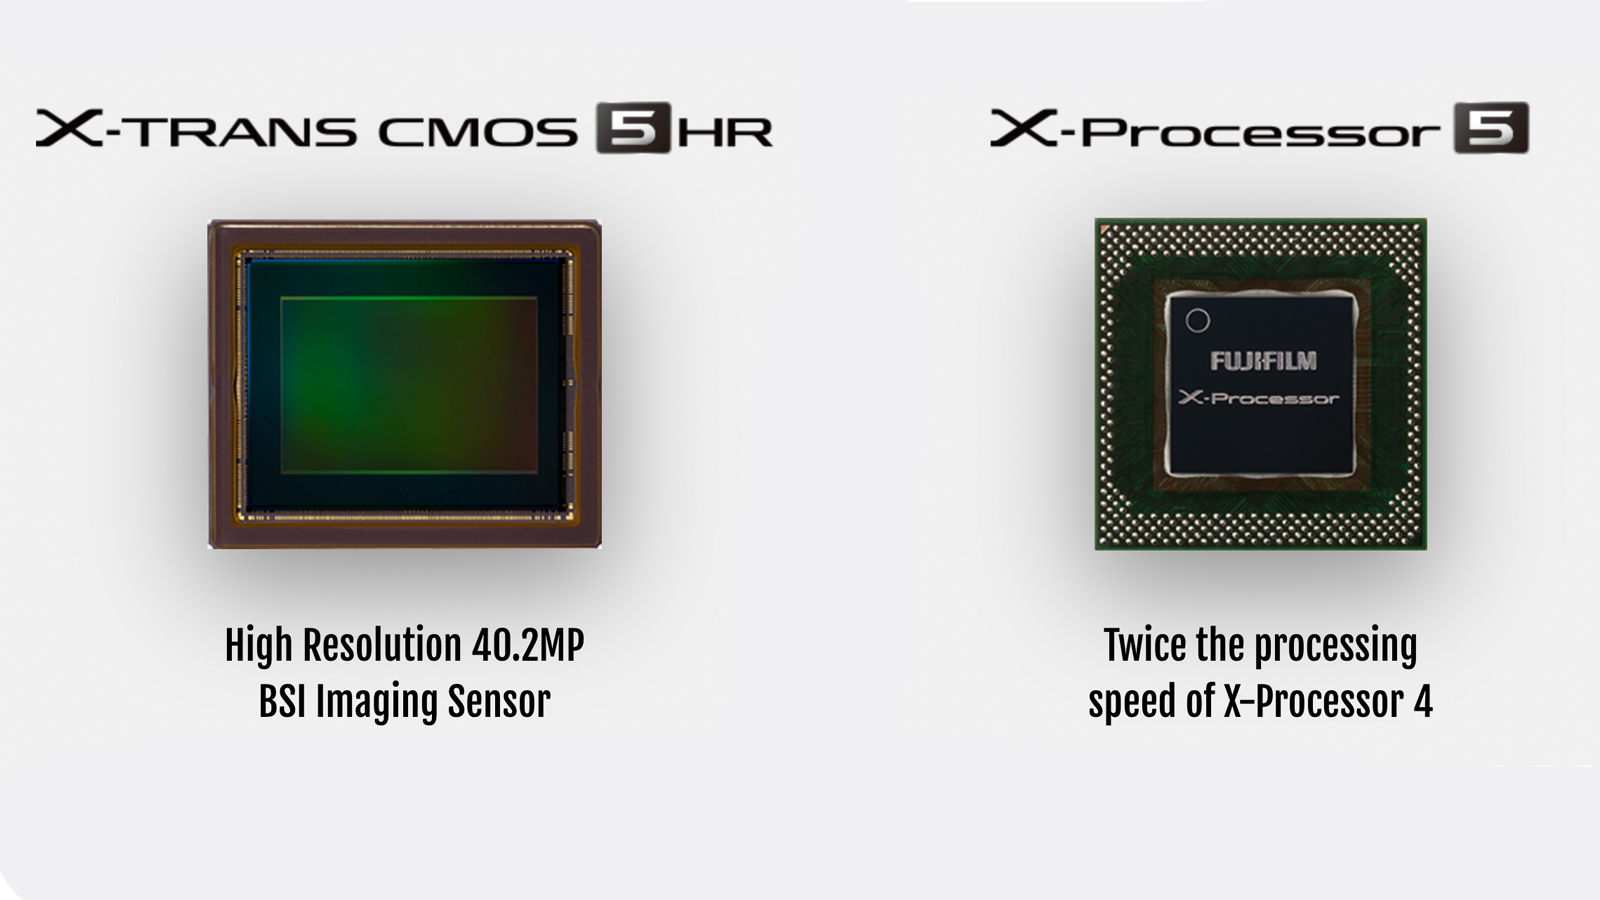 The sensor and processor from the Fujifilm X-T5